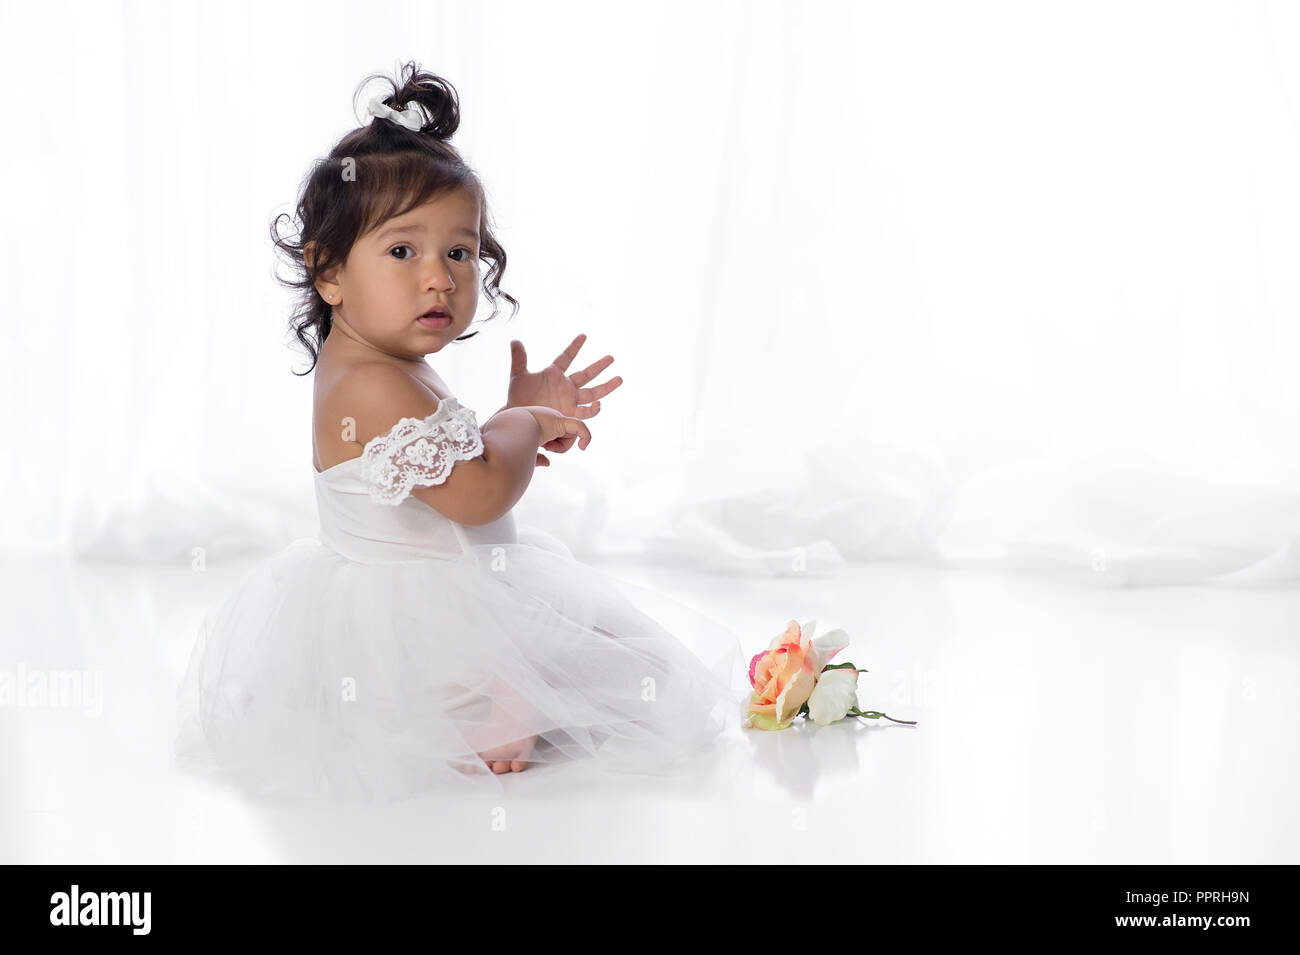 A one year old, baby girl sitting on the floor with a flower. She is wearing a white, tulle dress wtih lace sleeves. Stock Photo